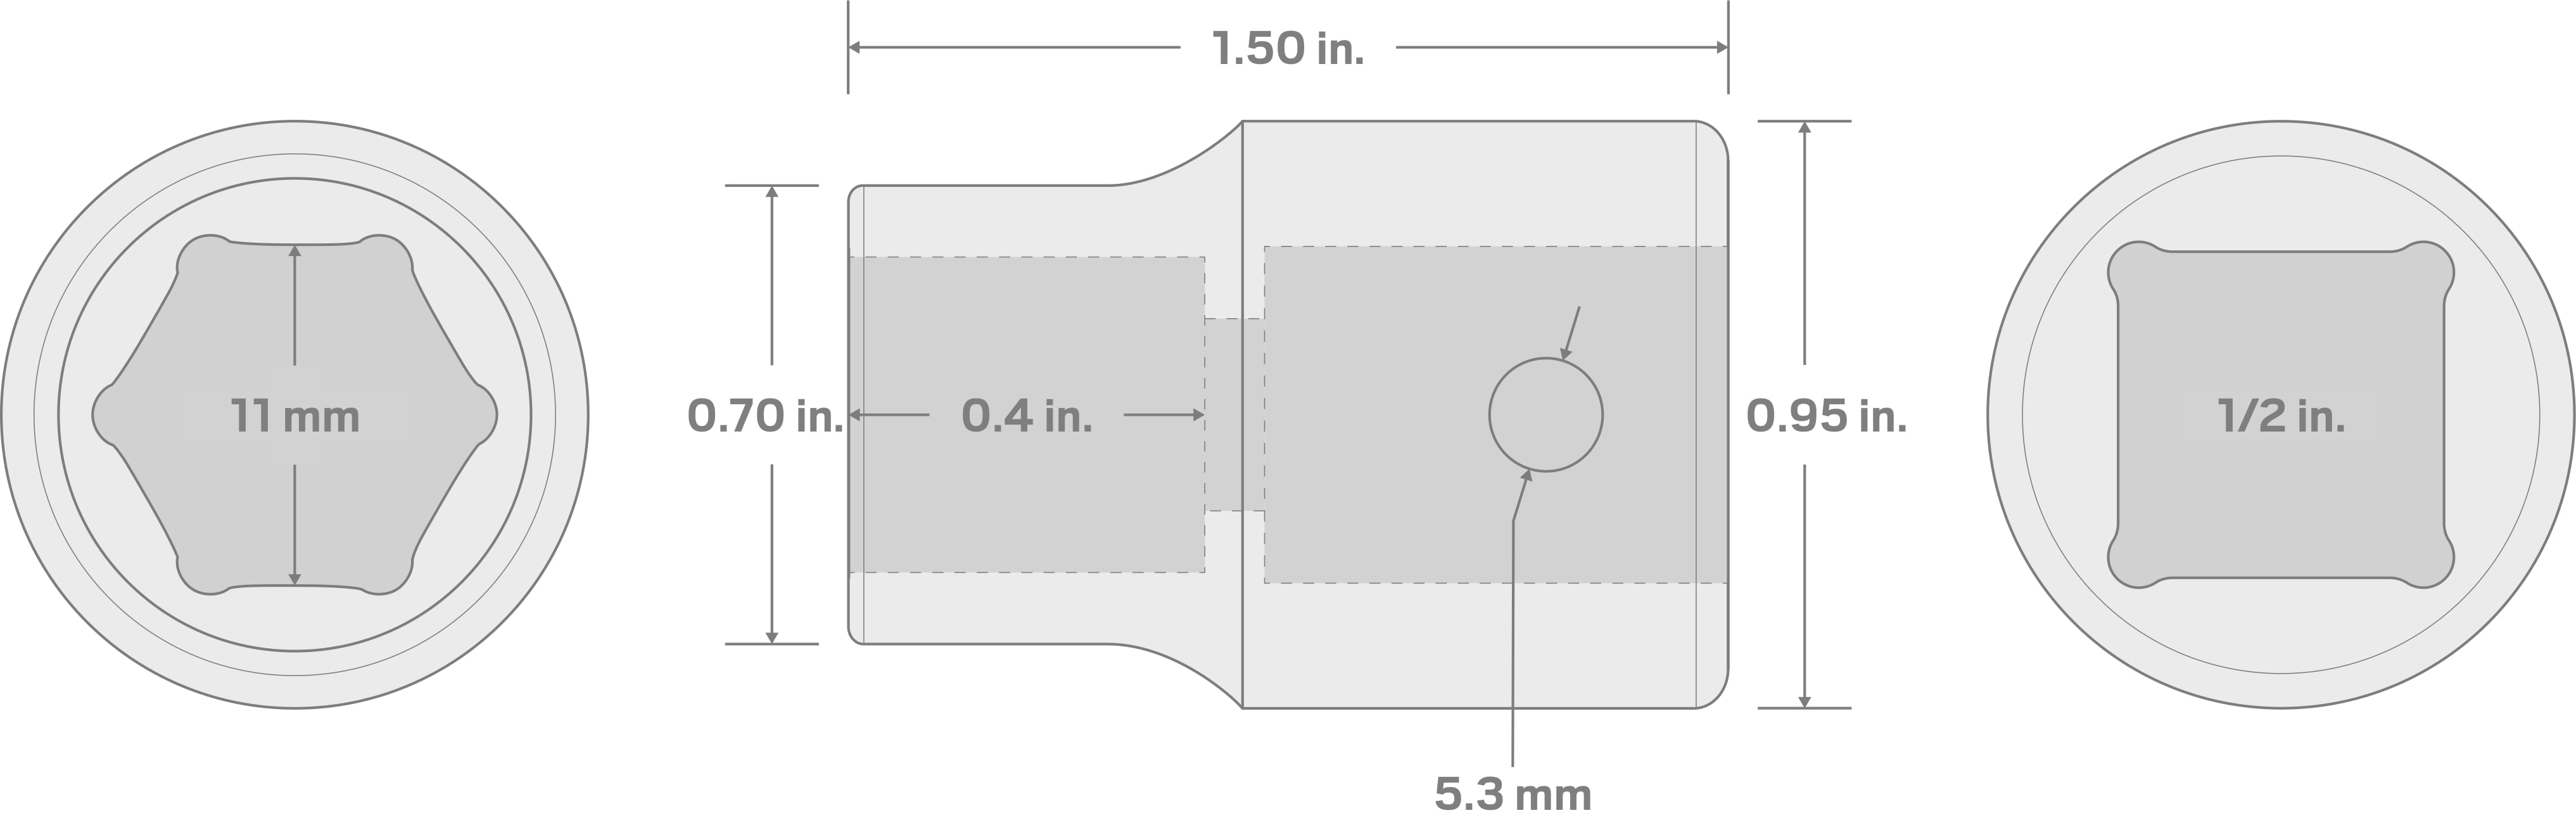 Specs for 1/2 Inch Drive x 11 mm 6-Point Impact Socket